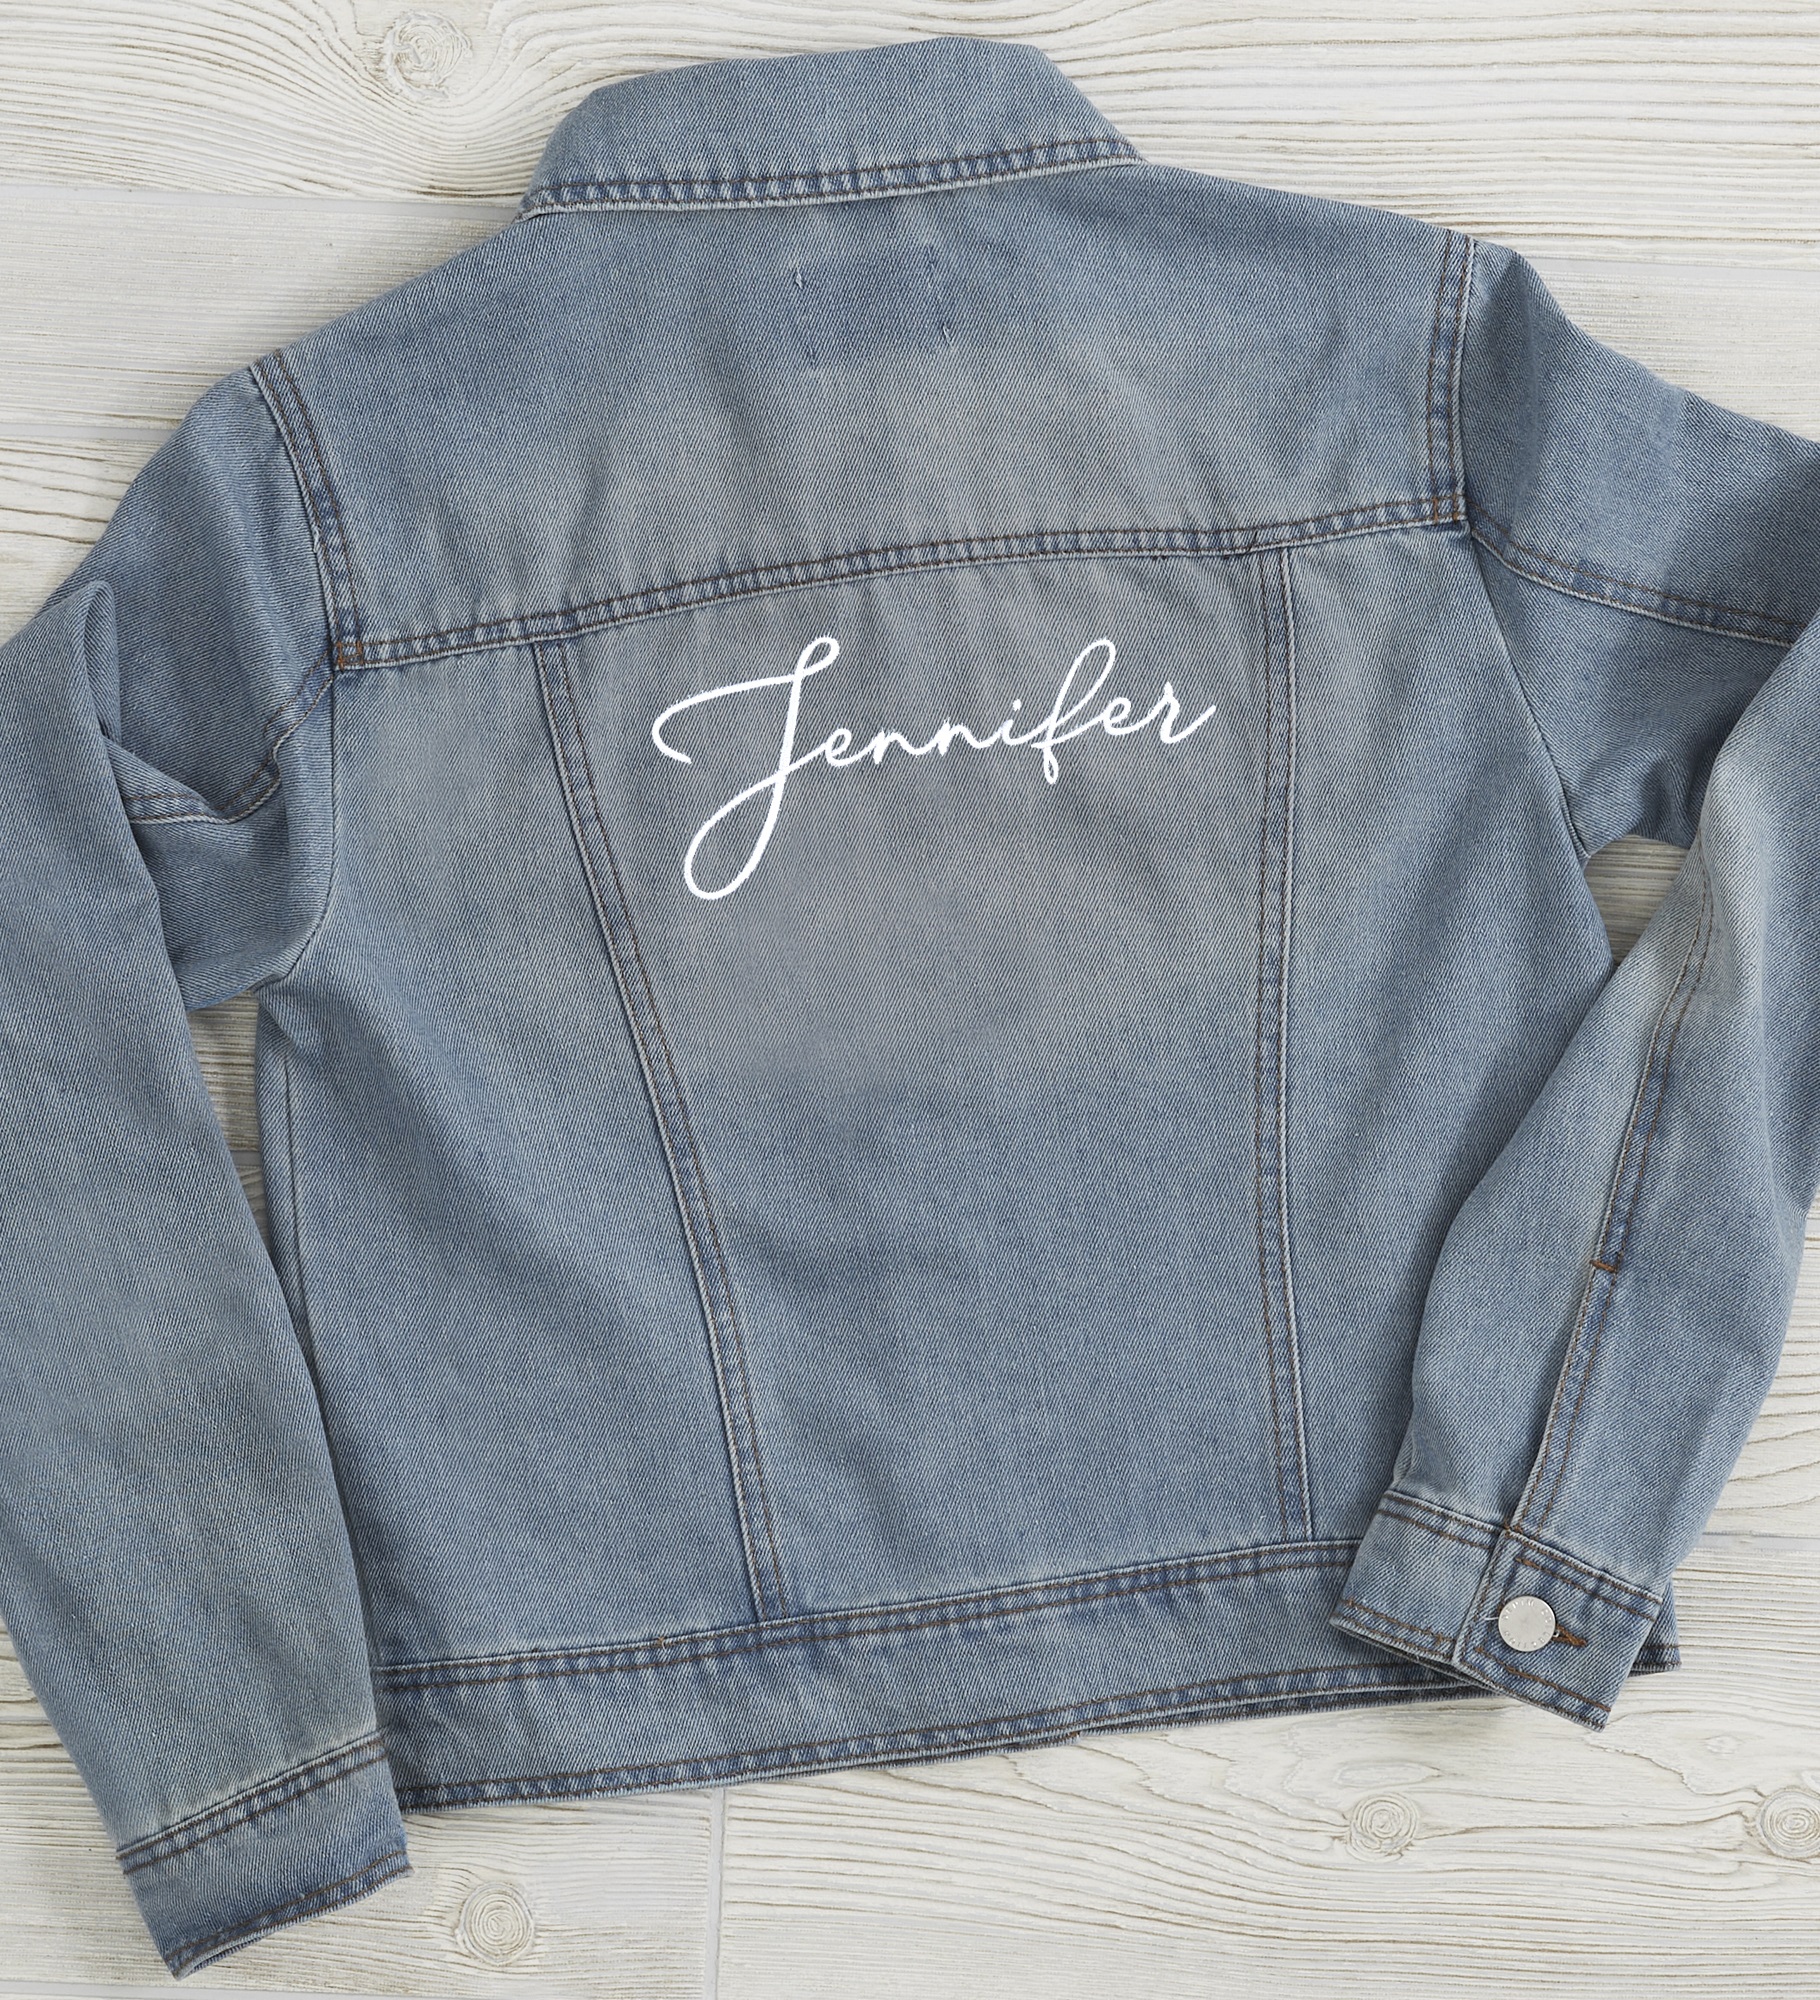 Classic Name Embroidered Jean Jacket